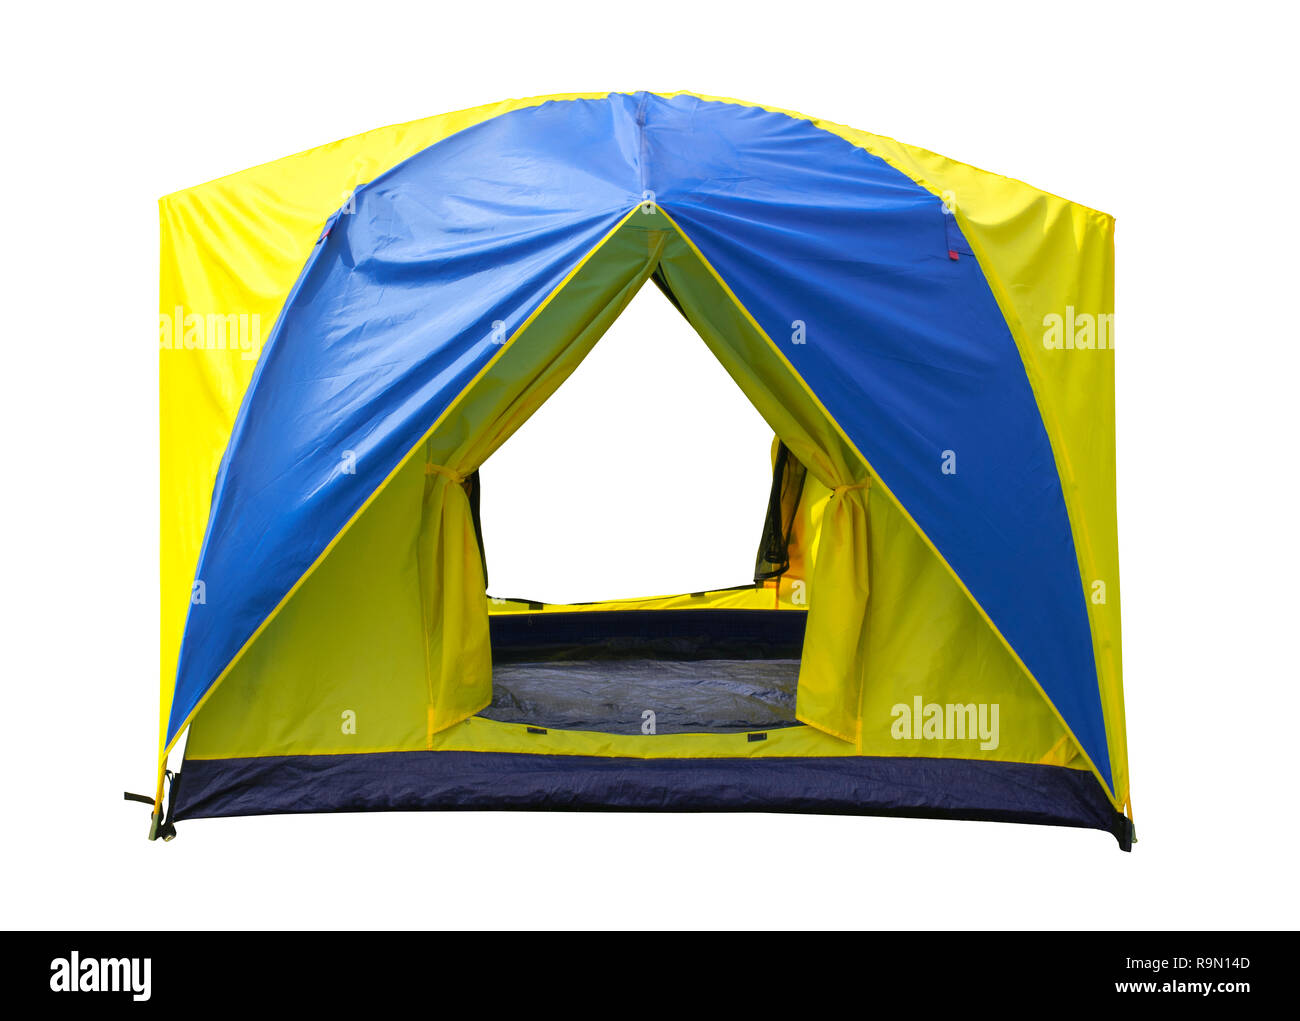 Dome camping tent model for the family on isolated background. Stock Photo